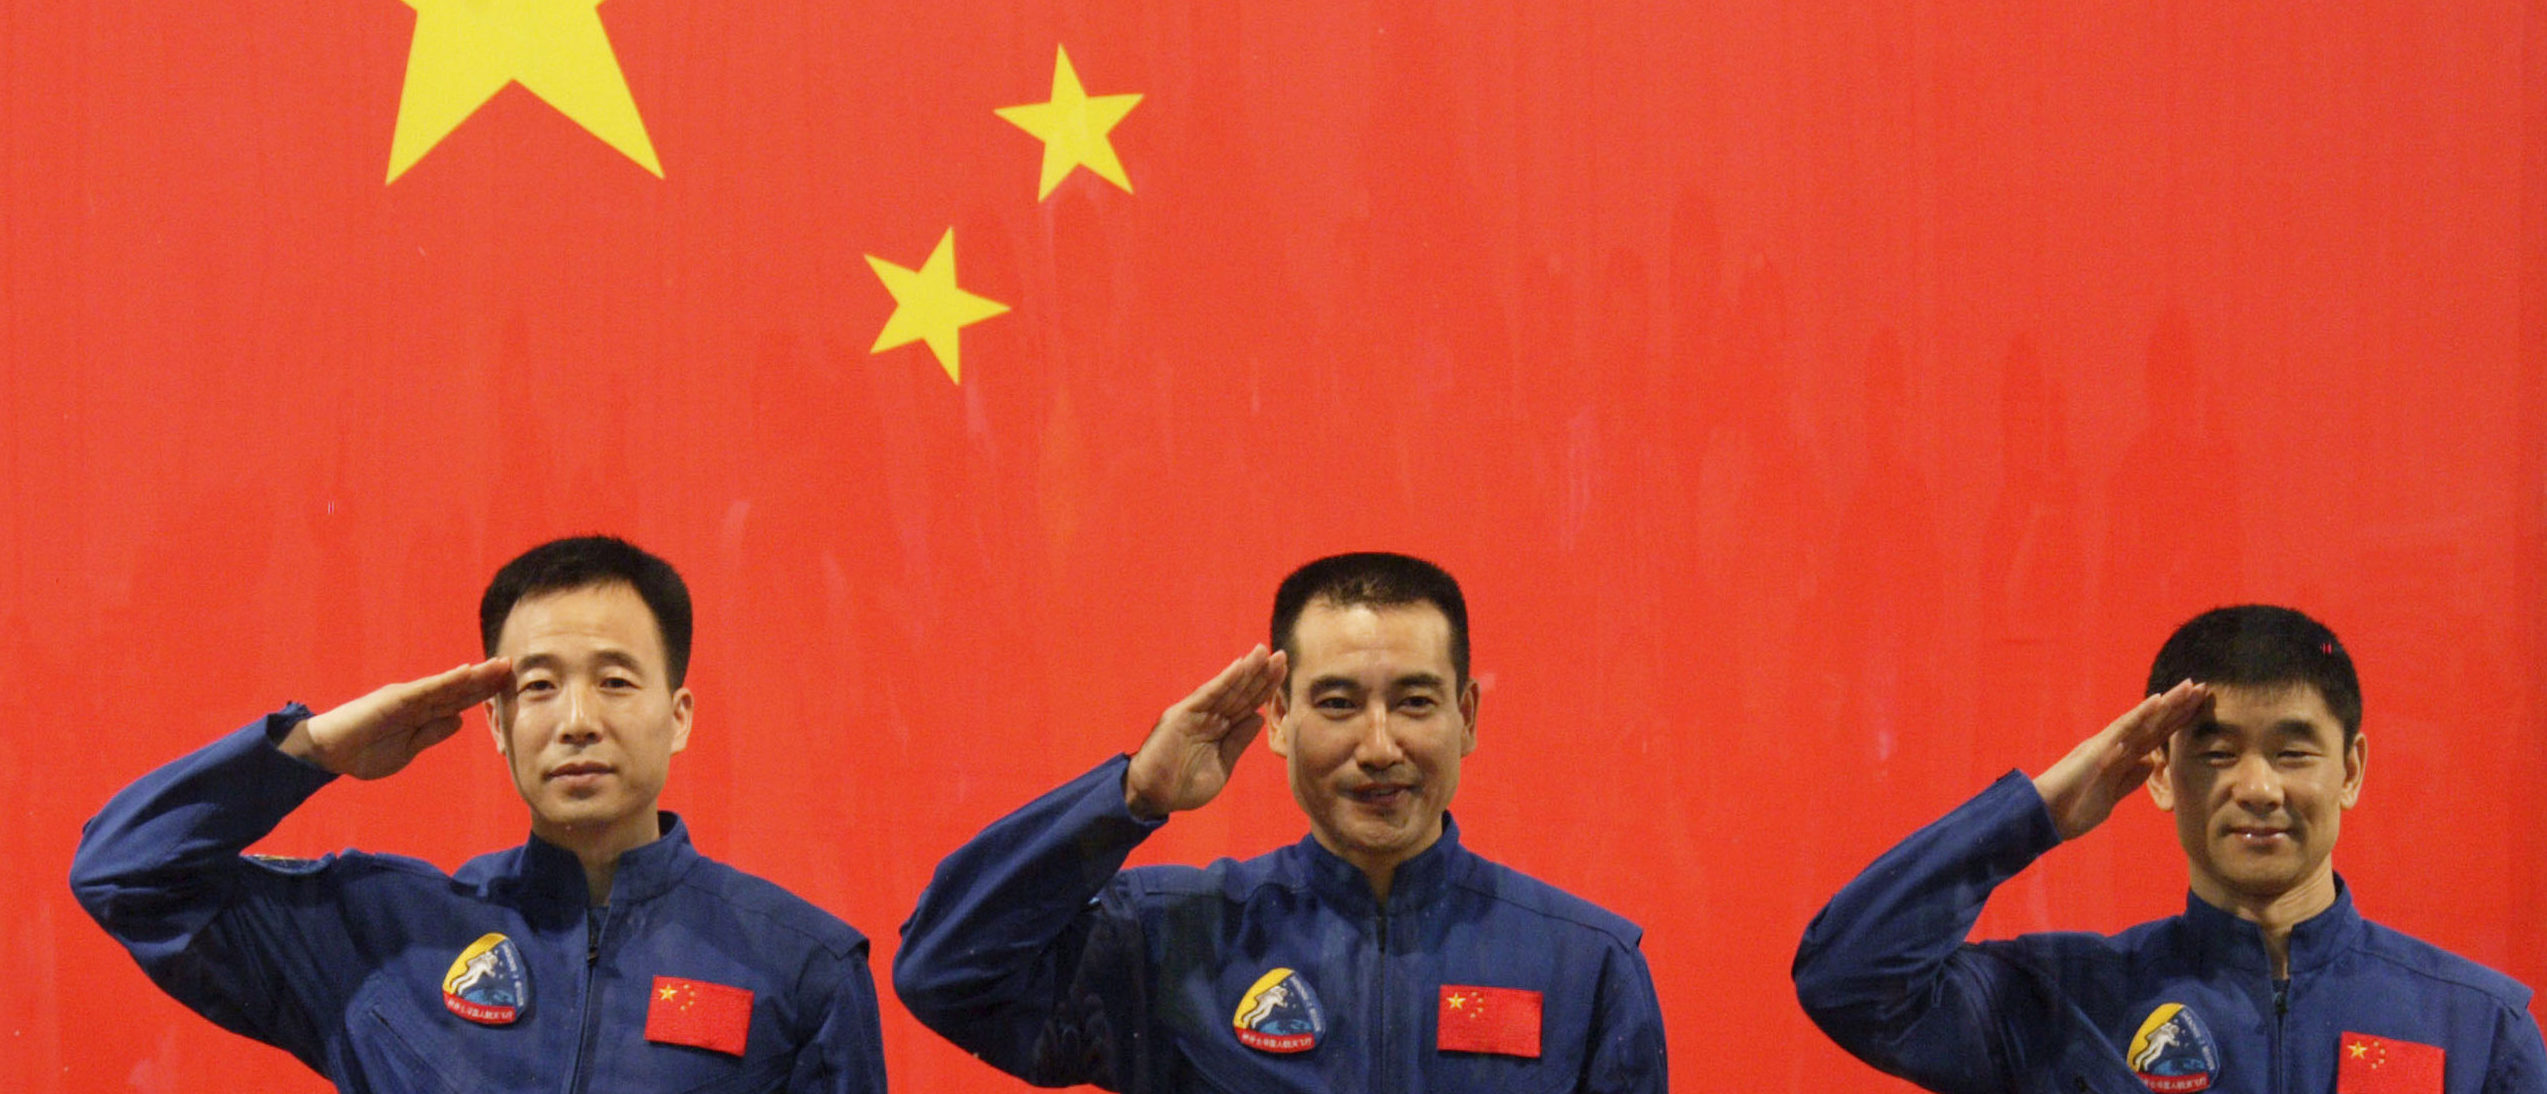 Chinese astronauts Jing Haipeng (L), Zhai Zhigang (C) and Liu Boming salute in front of a Chinese national flag during a news conference at the Jiuquan Satellite Launch Center, Gansu province September 24, 2008. China readied for its next leap into space on Thursday, with the Shenzhou VII craft primed to blast off with three astronauts and plans for a first space walk that will underscore the country's technological ambitions. Picture taken September 24, 2008. (REUTERS/Stringer)